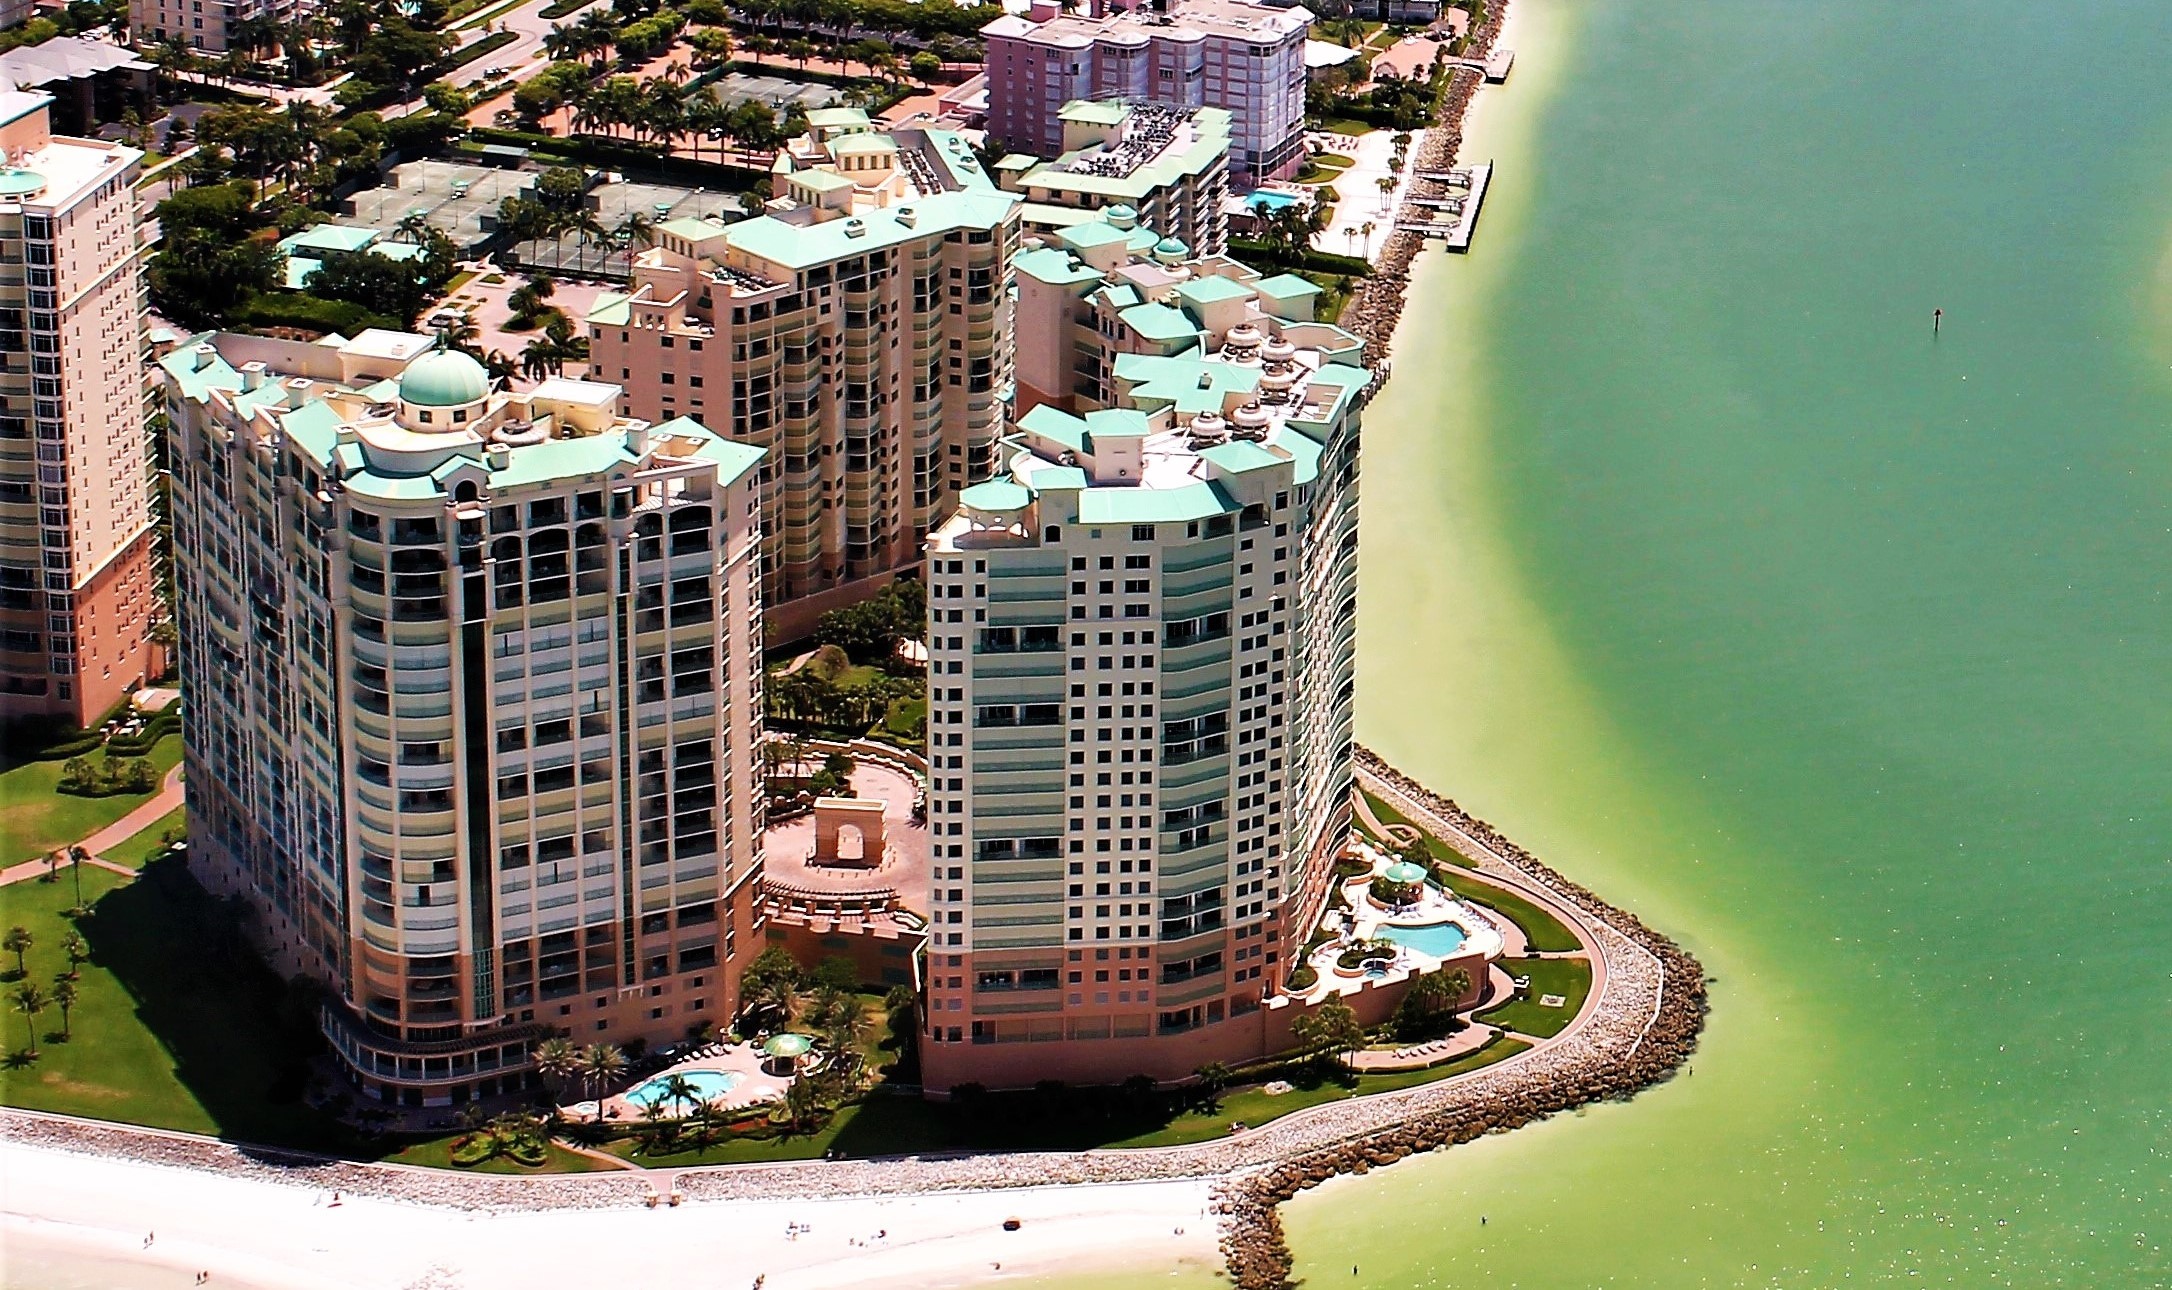 Marco Island Condos for sale, Luxury condos for sale, Marco Island Real Estates, Marco Island Real Estate for sale